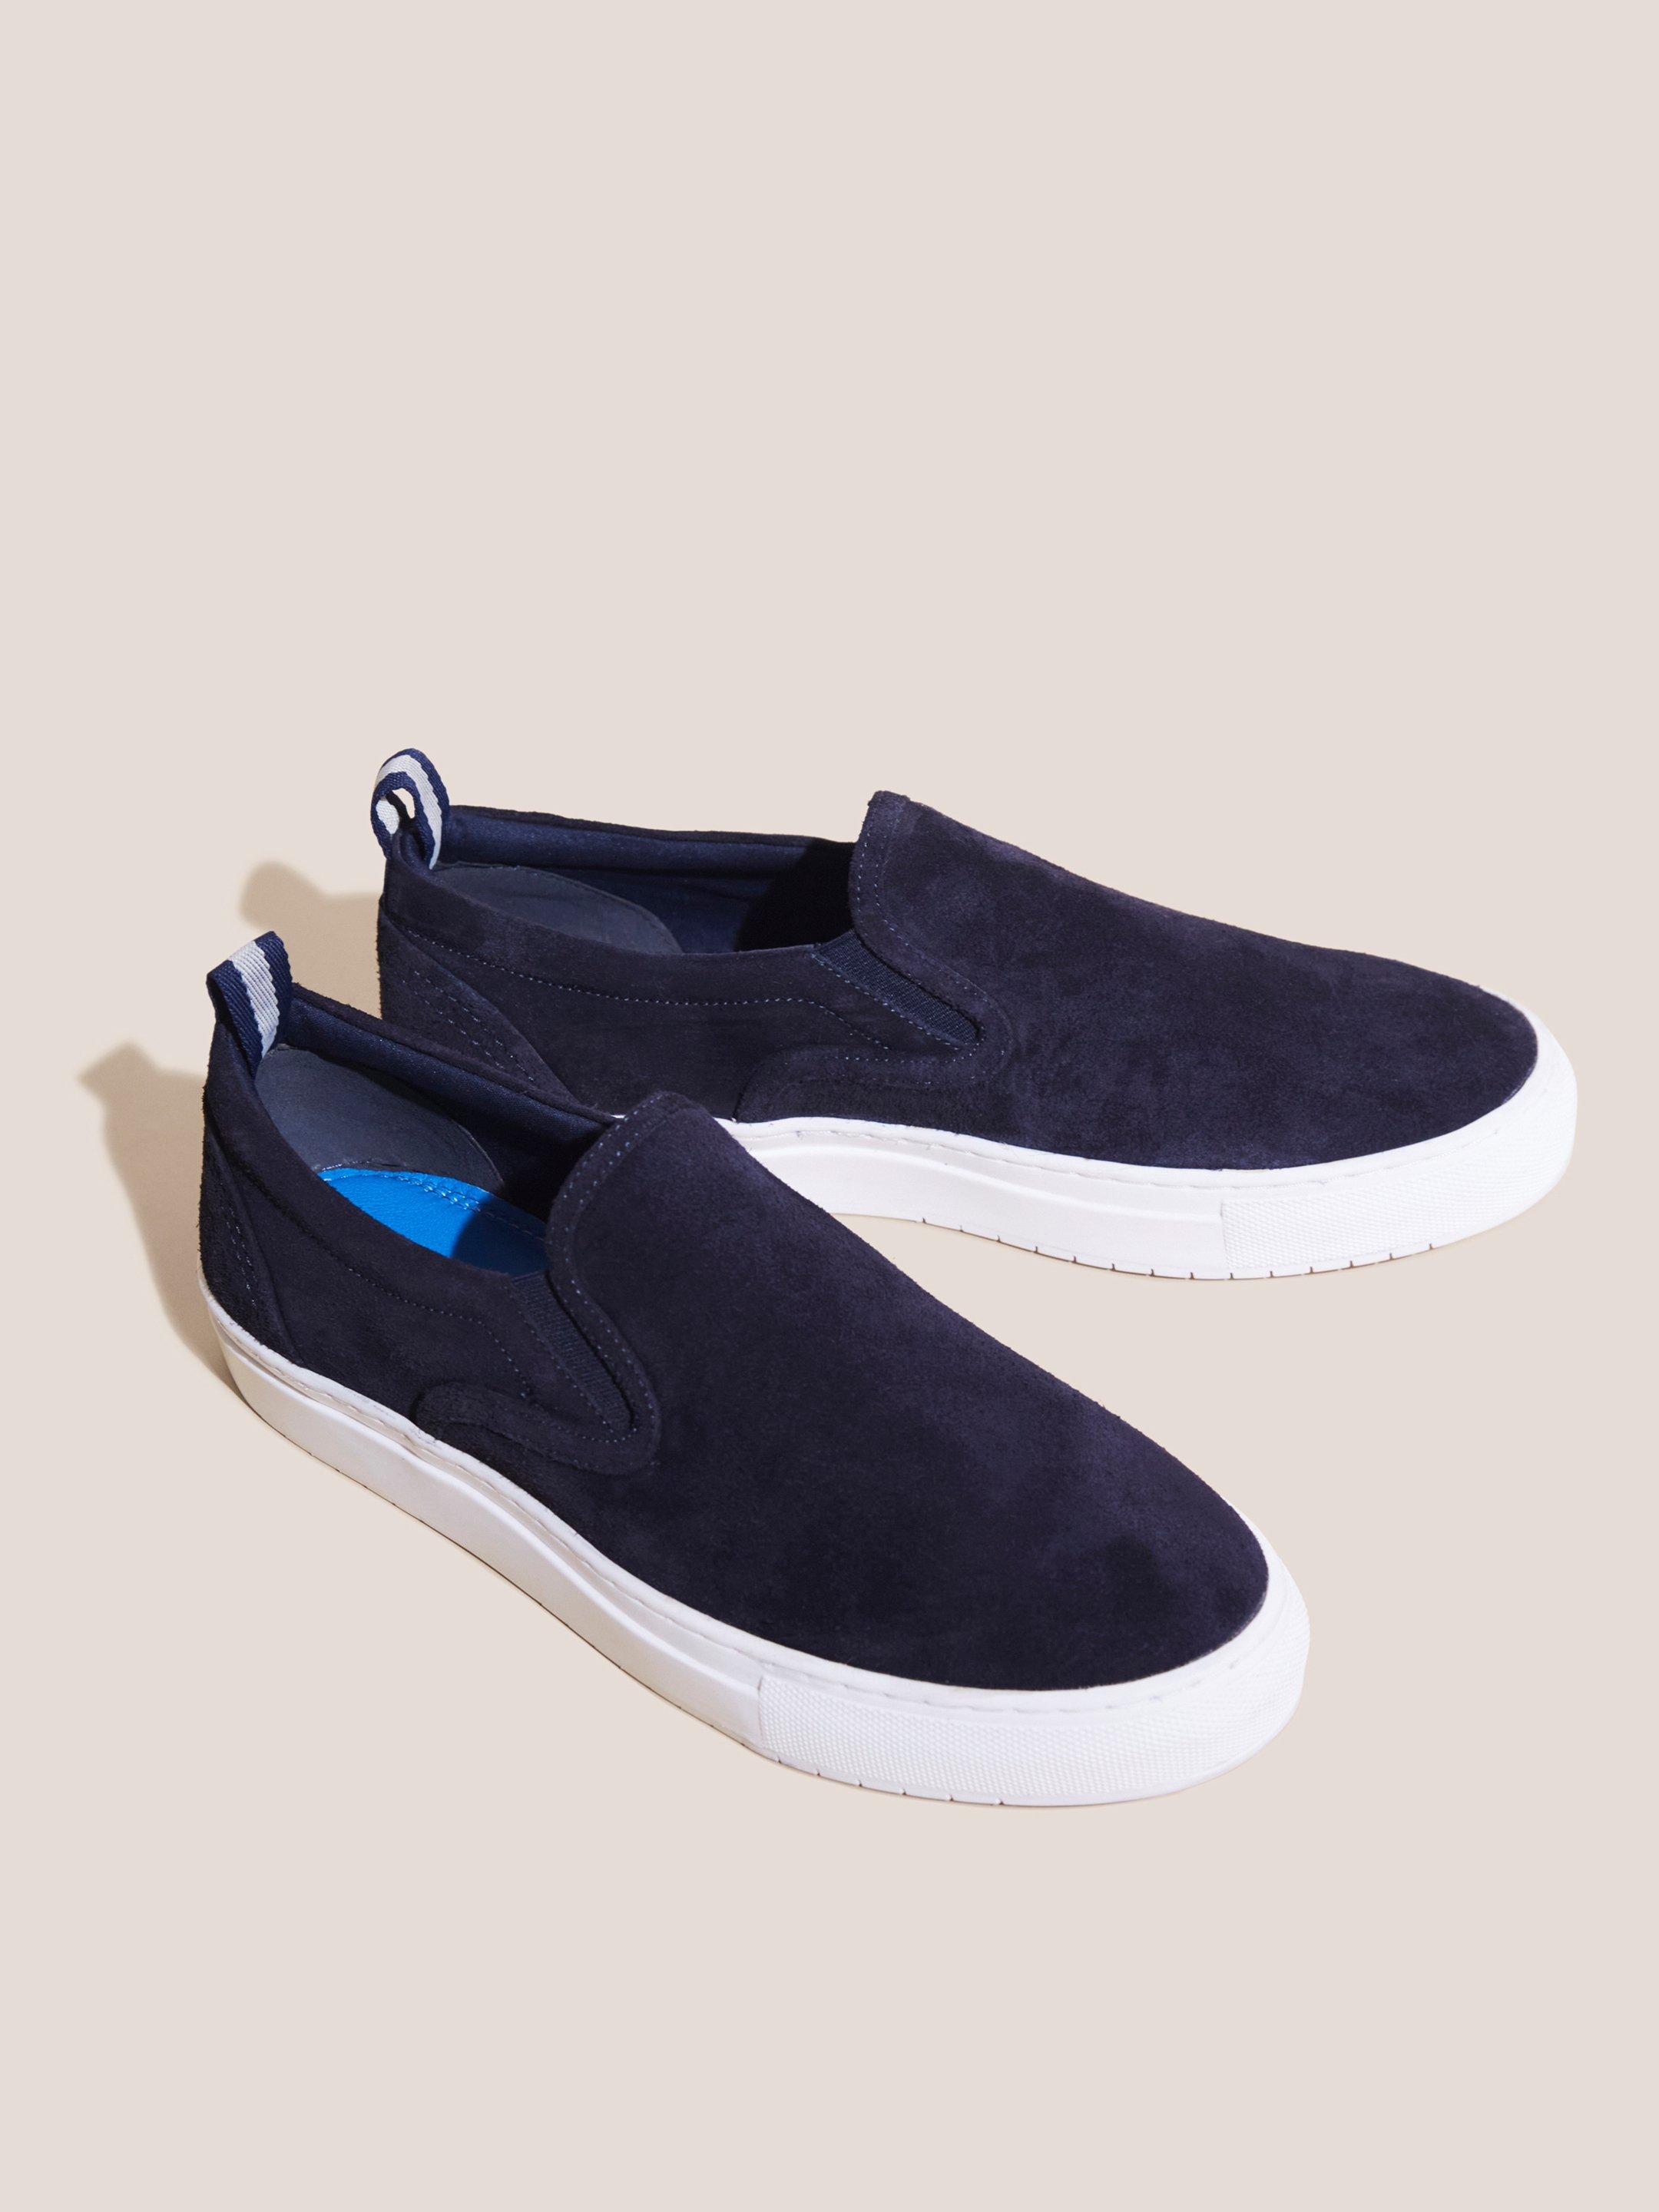 Suede Slip On Trainer in NAVY MULTI - FLAT FRONT